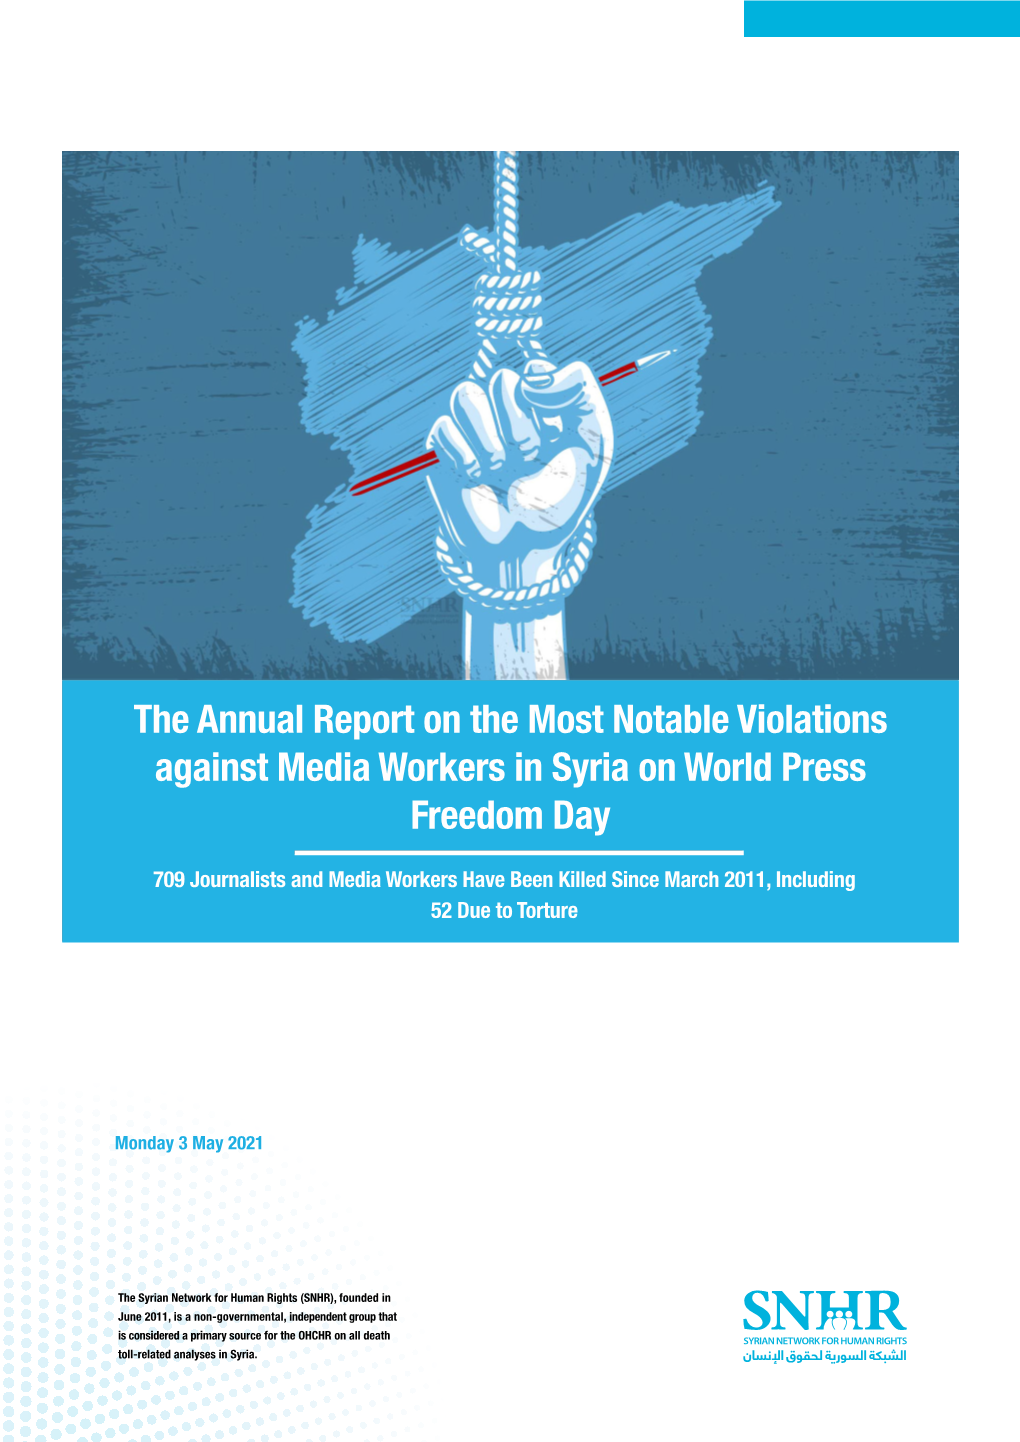 The Annual Report on the Most Notable Violations Against Media Workers in Syria on World Press Freedom Day